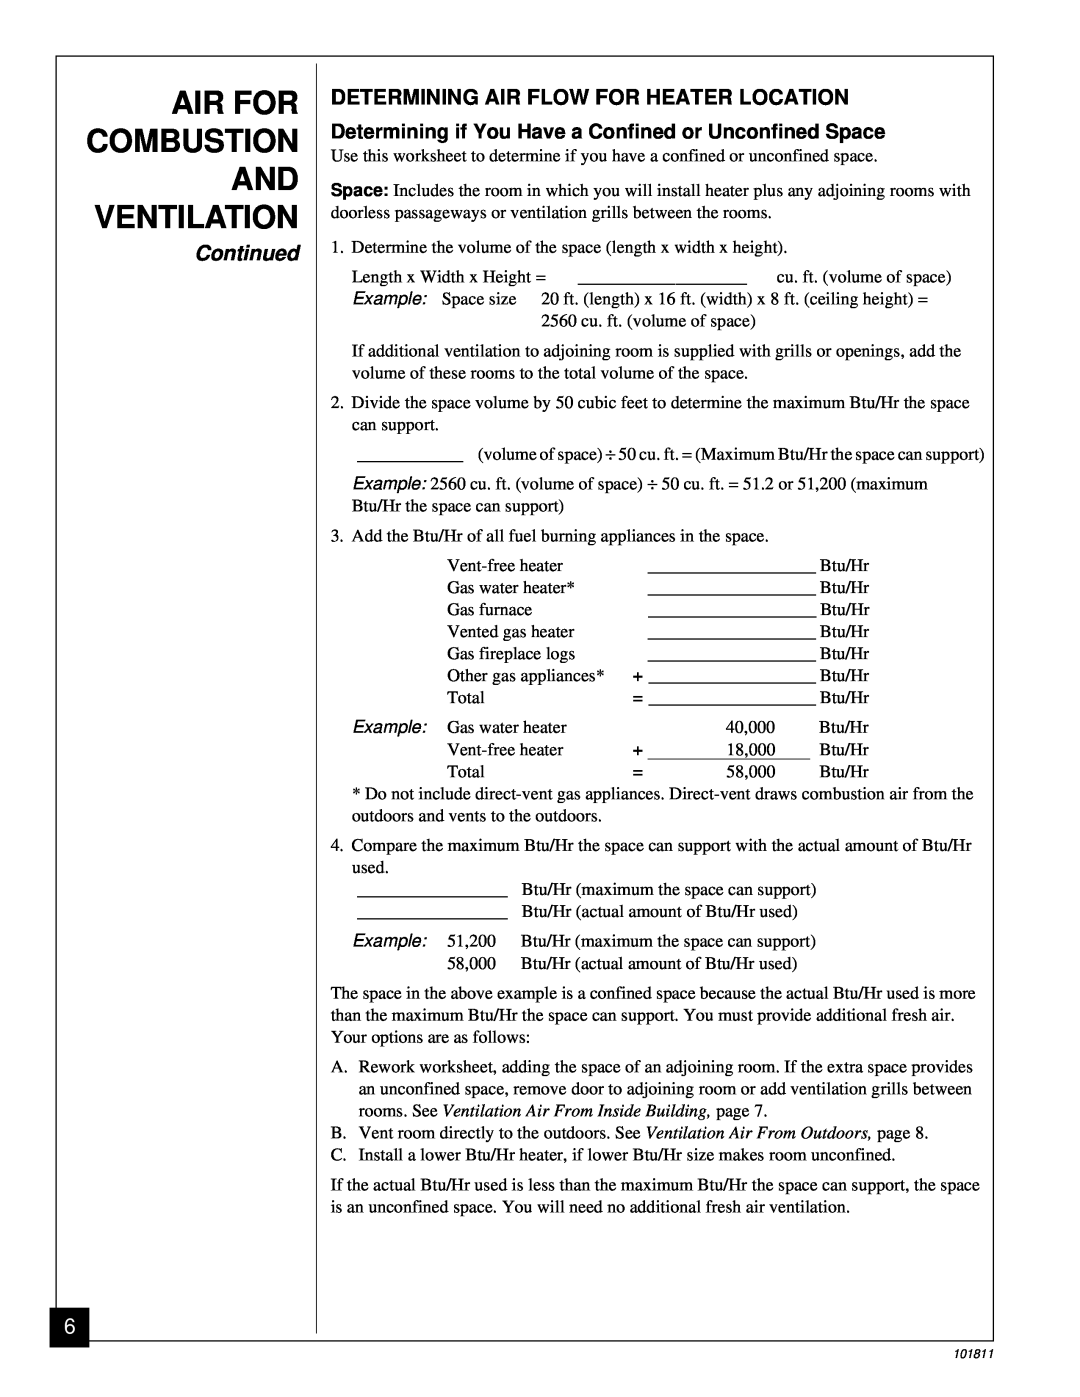 Desa 101811-01C.pdf Air For Combustion And Ventilation, Continued, Determining Air Flow For Heater Location 